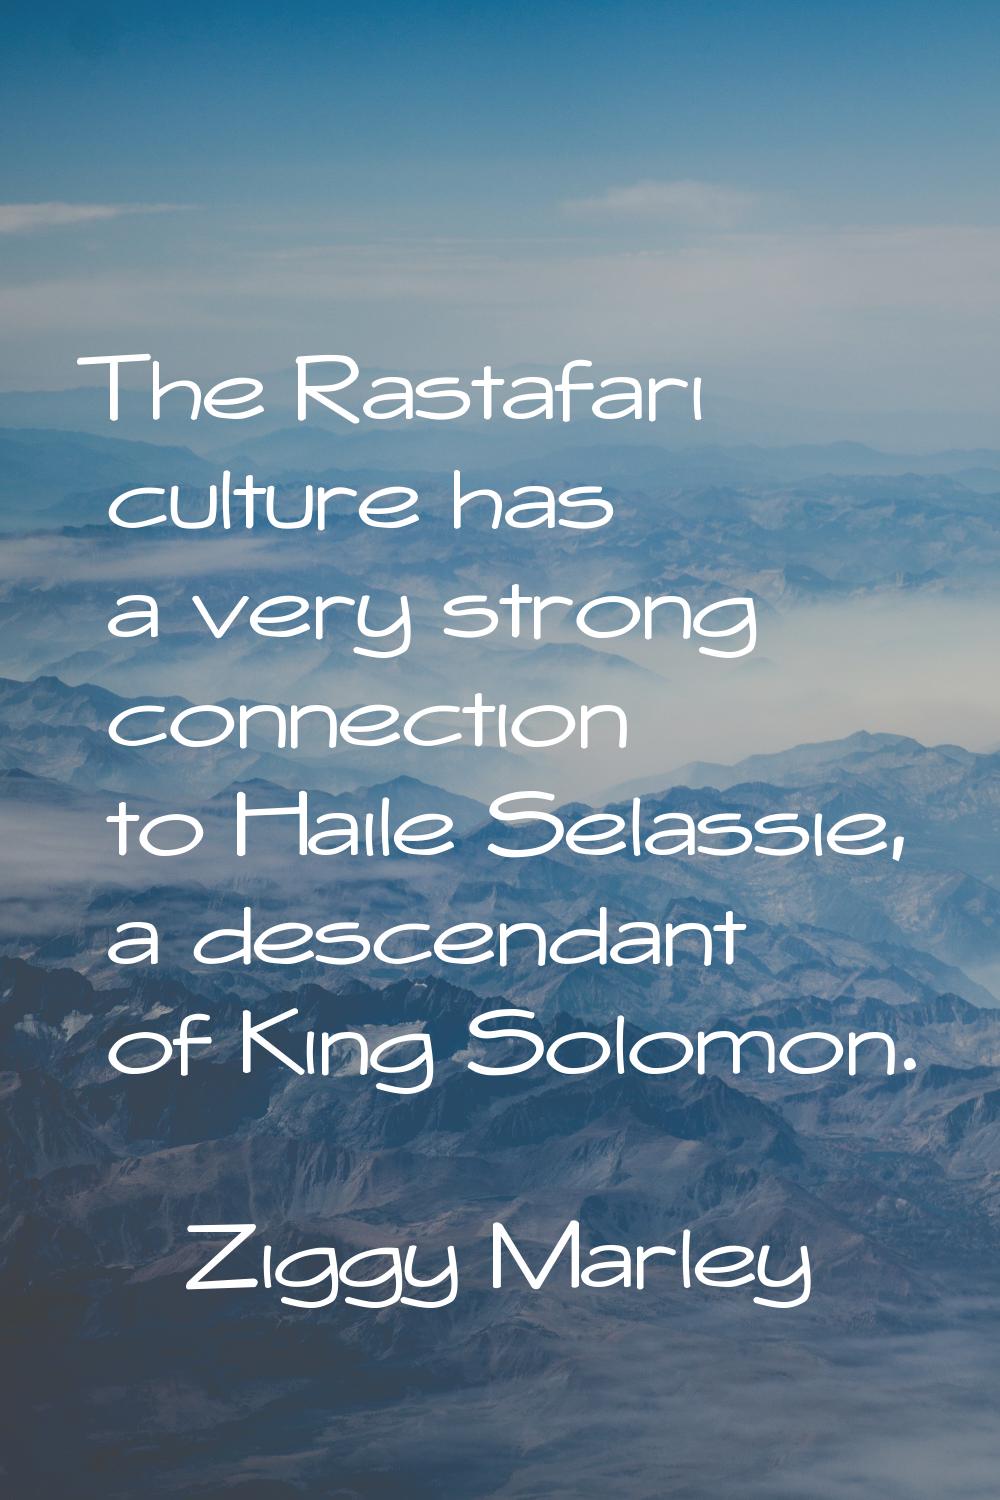 The Rastafari culture has a very strong connection to Haile Selassie, a descendant of King Solomon.